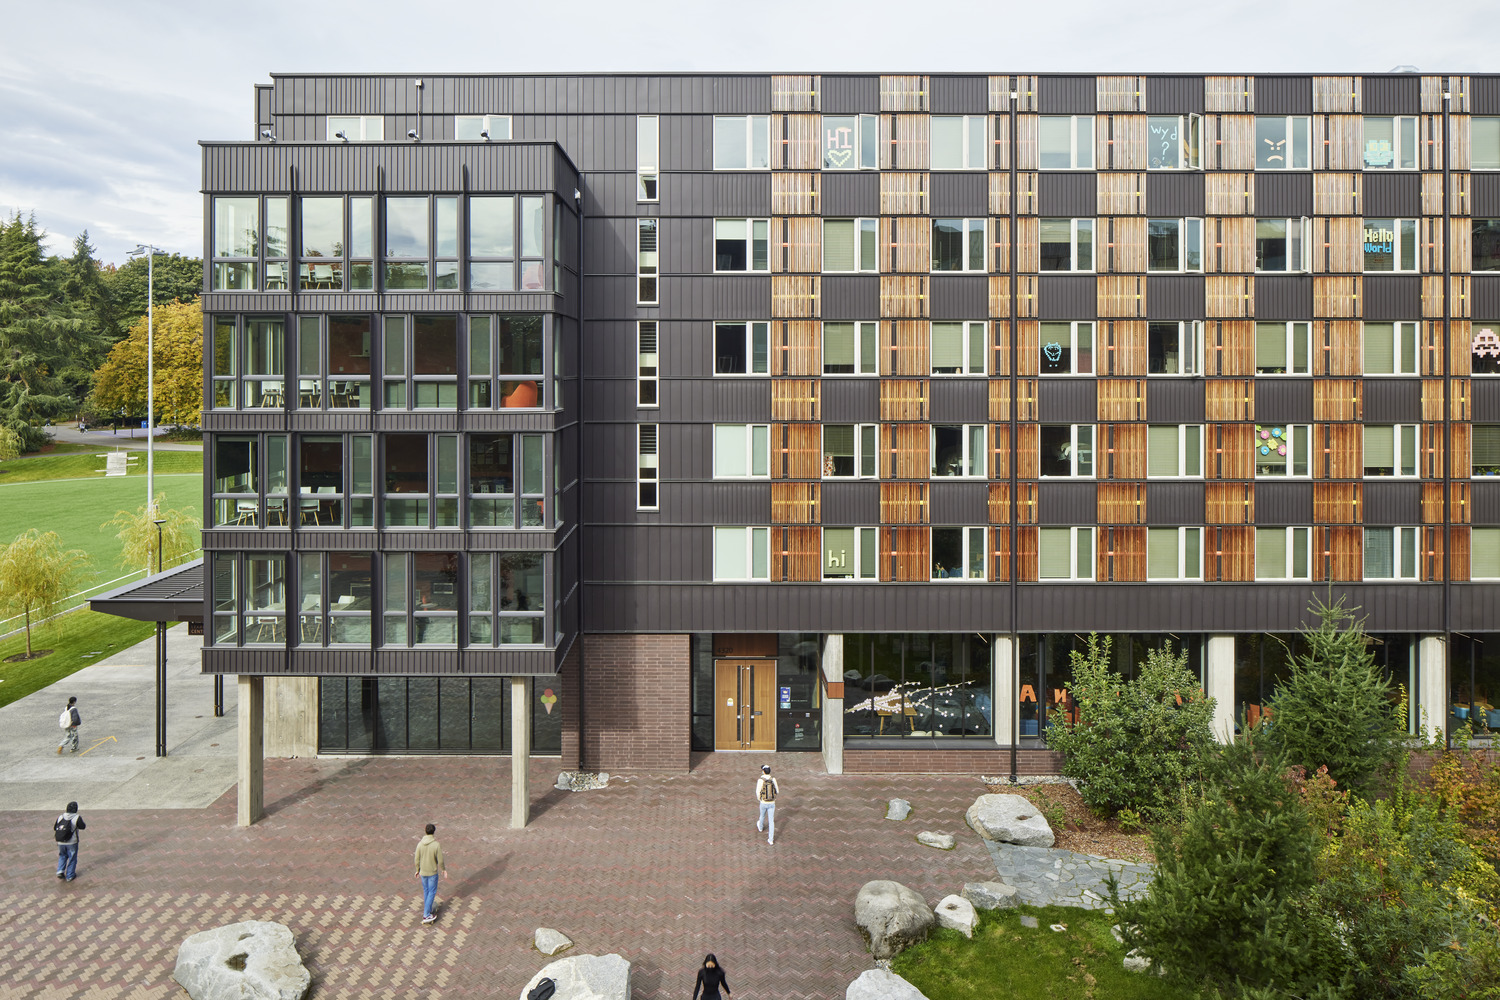 <p>The design process entailed a deep study of wood weathering patterns and drivers, and rainscreen detailing was guided by anticipation of that—acknowledging that the western red cedar is a natural material and to best set up long-term success both in terms of aesthetics and limited maintenance. | <small>&copy; Bruce Damonte</small></p>